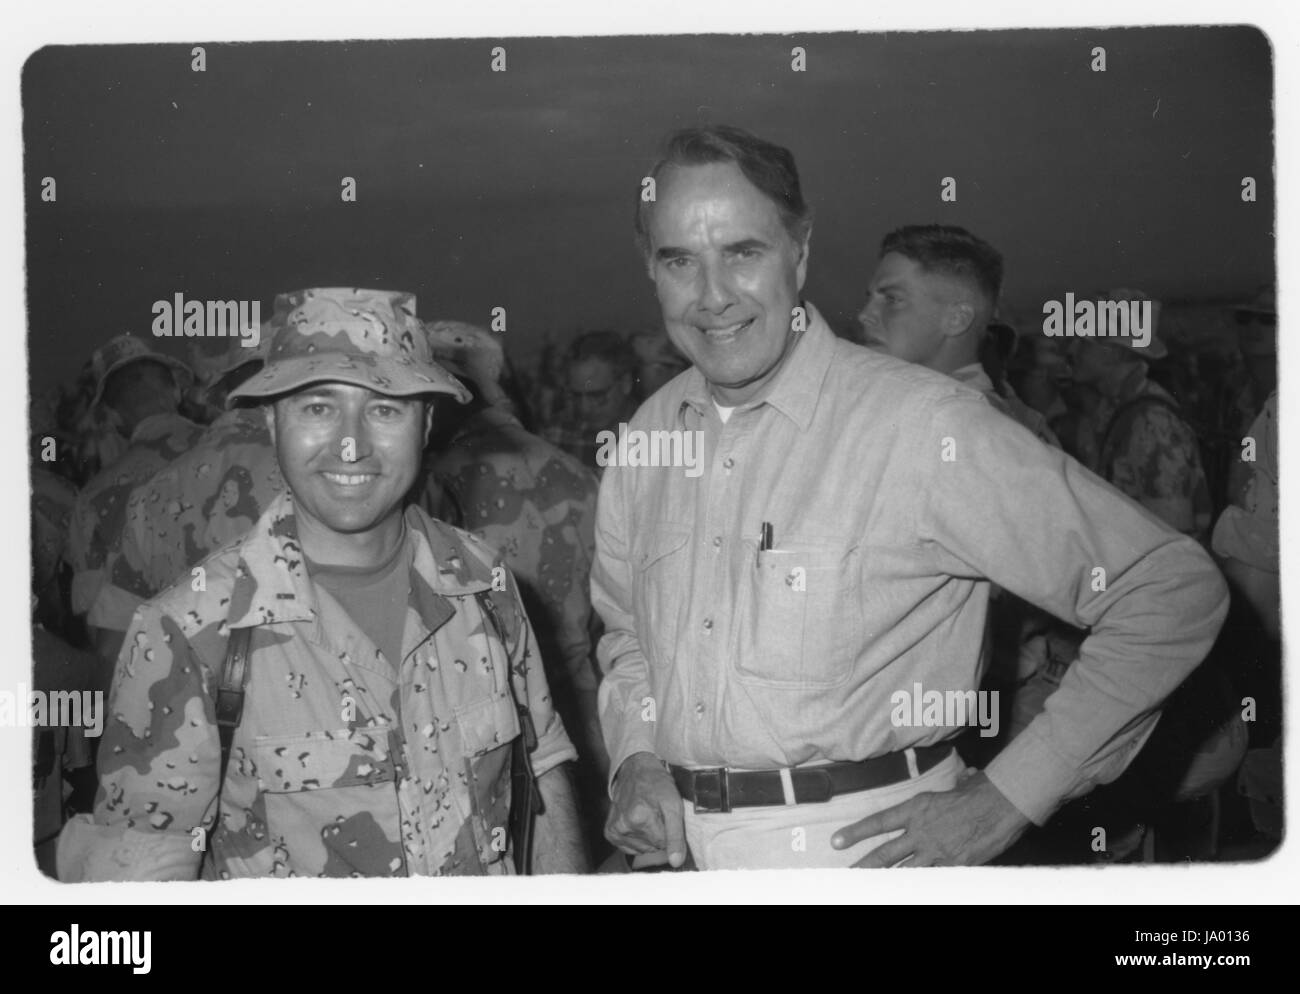 Senator Robert Dole pauses for a photo with a Marine while paying a Thanksgiving Day visit to the 1st Marine Division combat operations center during OPERATION DESERT SHIELD, Saudi Arabia, 11/23/1990. Stock Photo